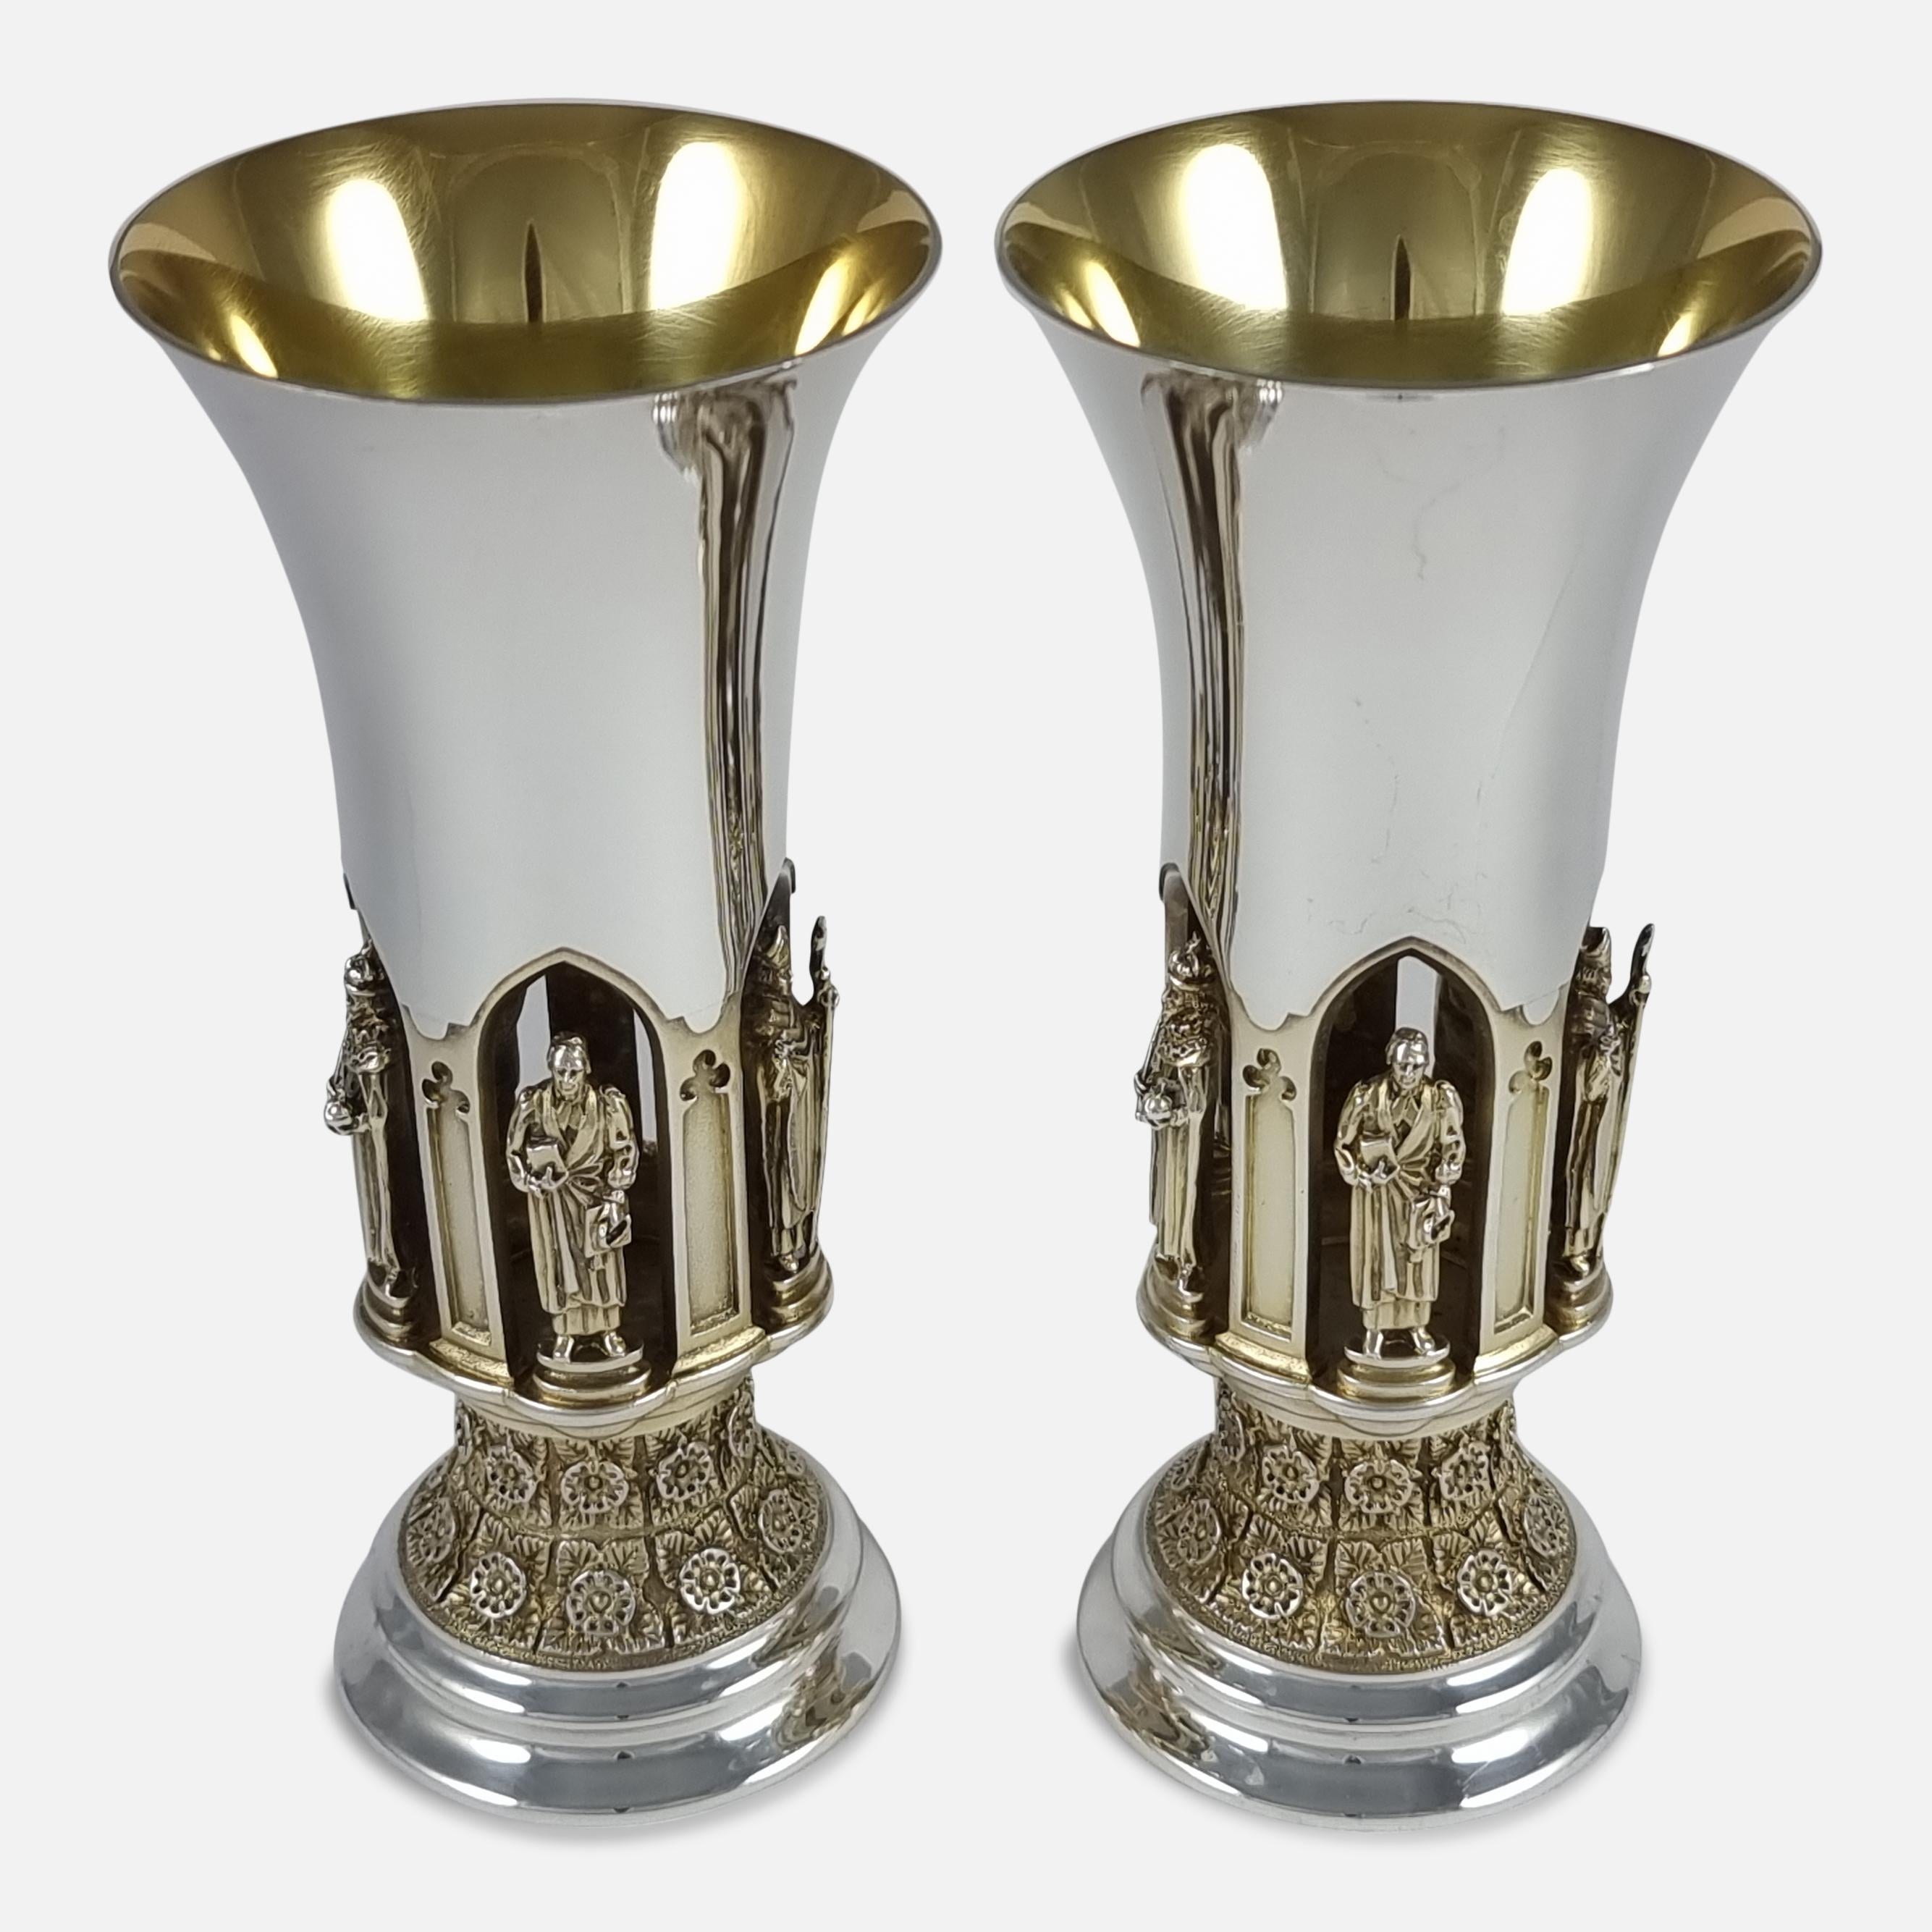 Pair of Aurum Silver Gilt 'Ripon Diocese Foundation' Goblets by Hector Miller 7